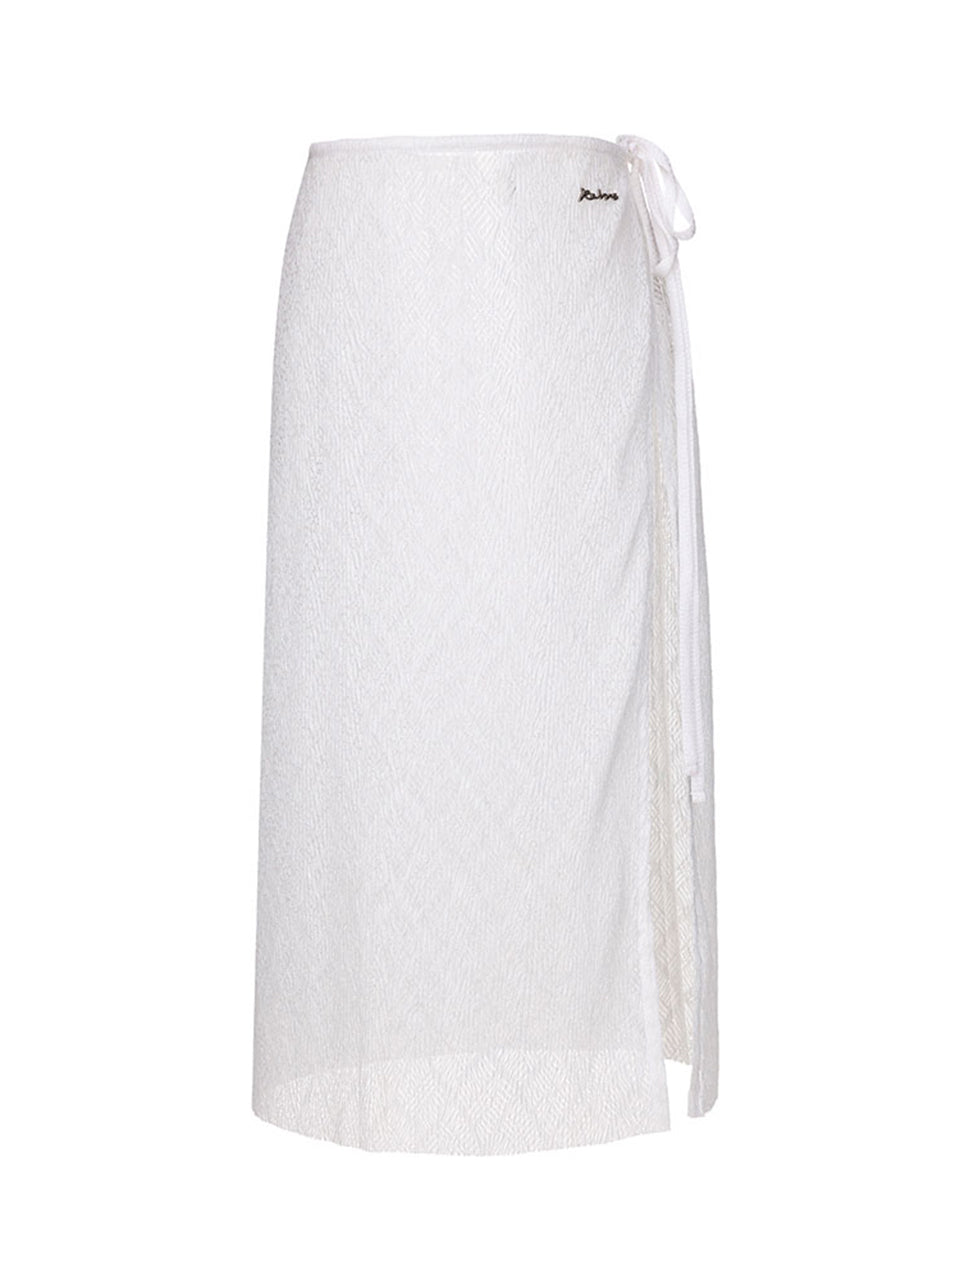 Lace Wrap Skirt in White